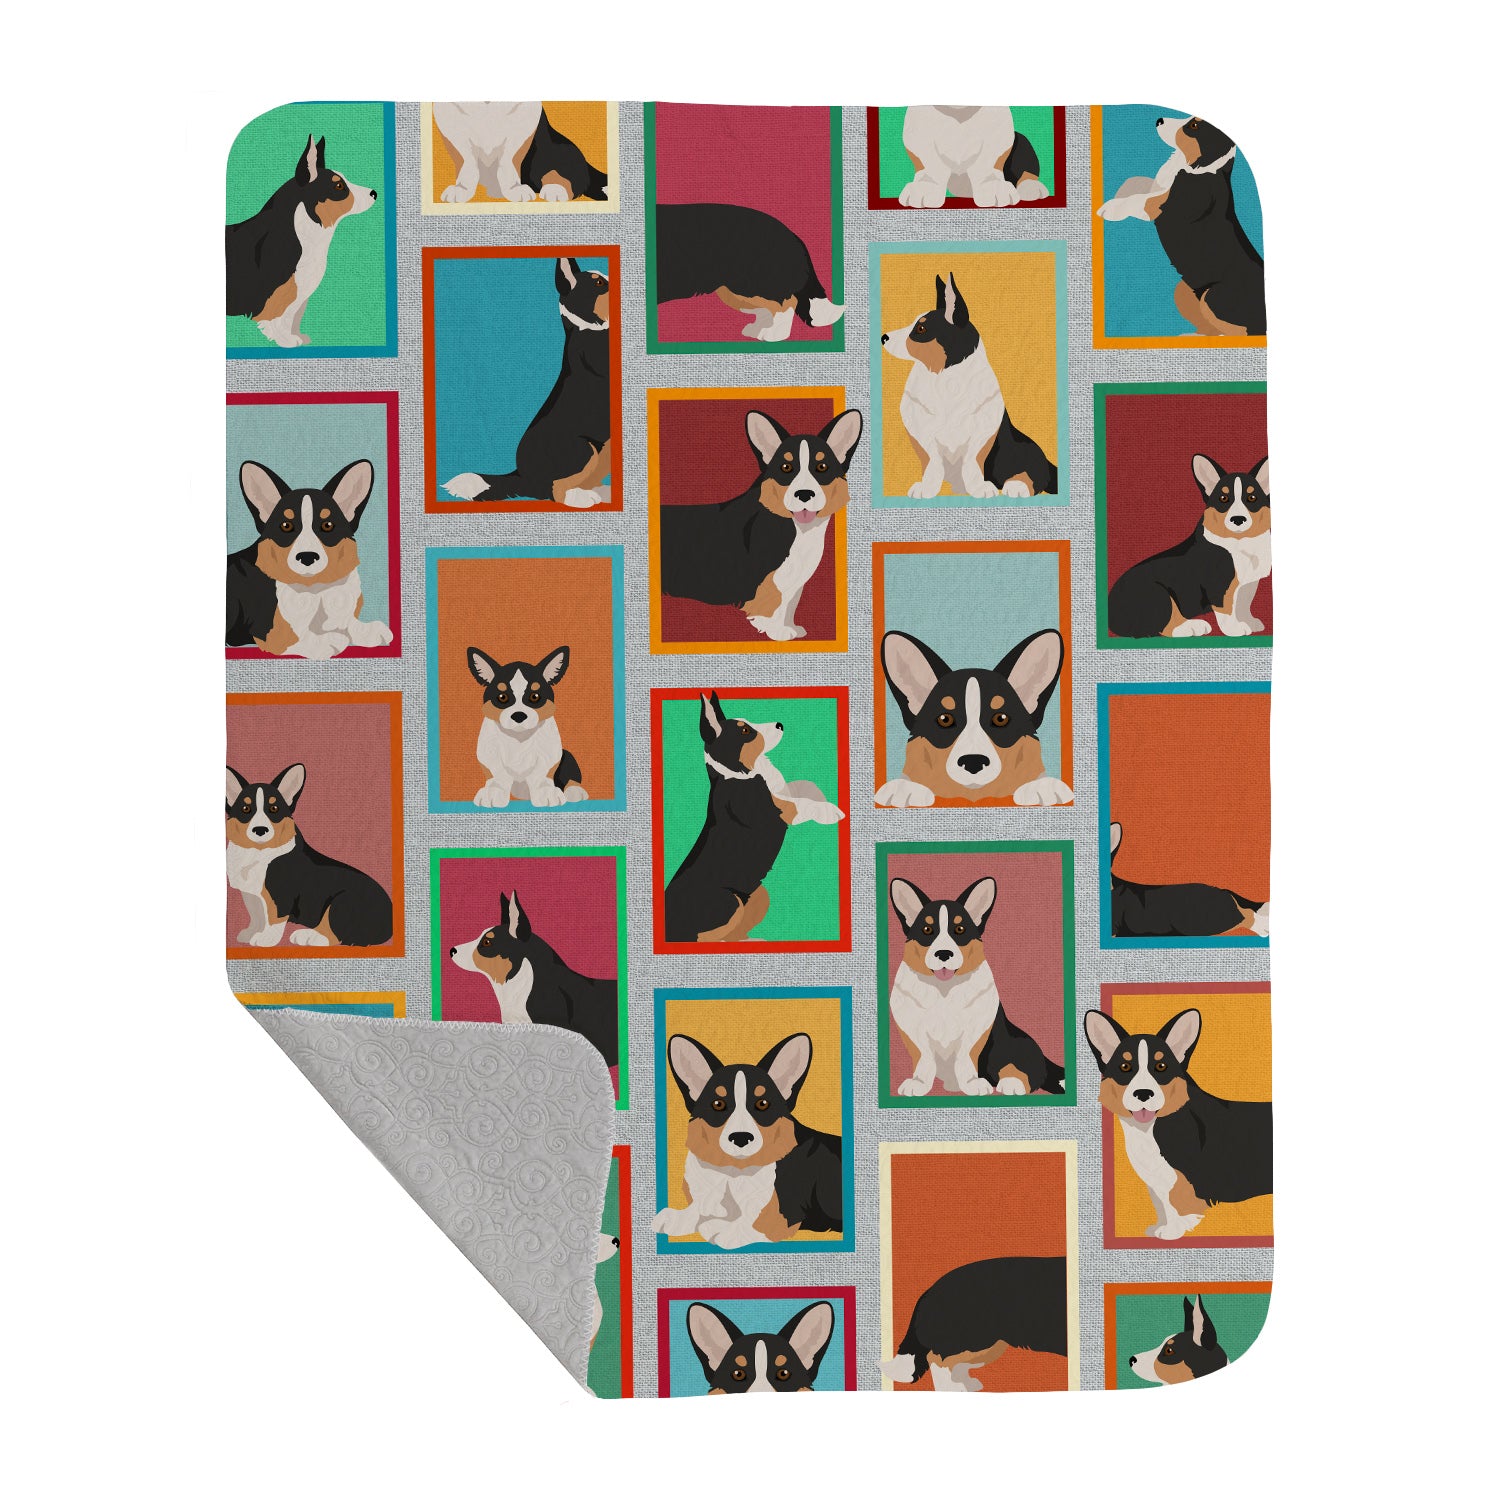 Buy this Lots of Tricolor Cardigan Corgi Quilted Blanket 50x60